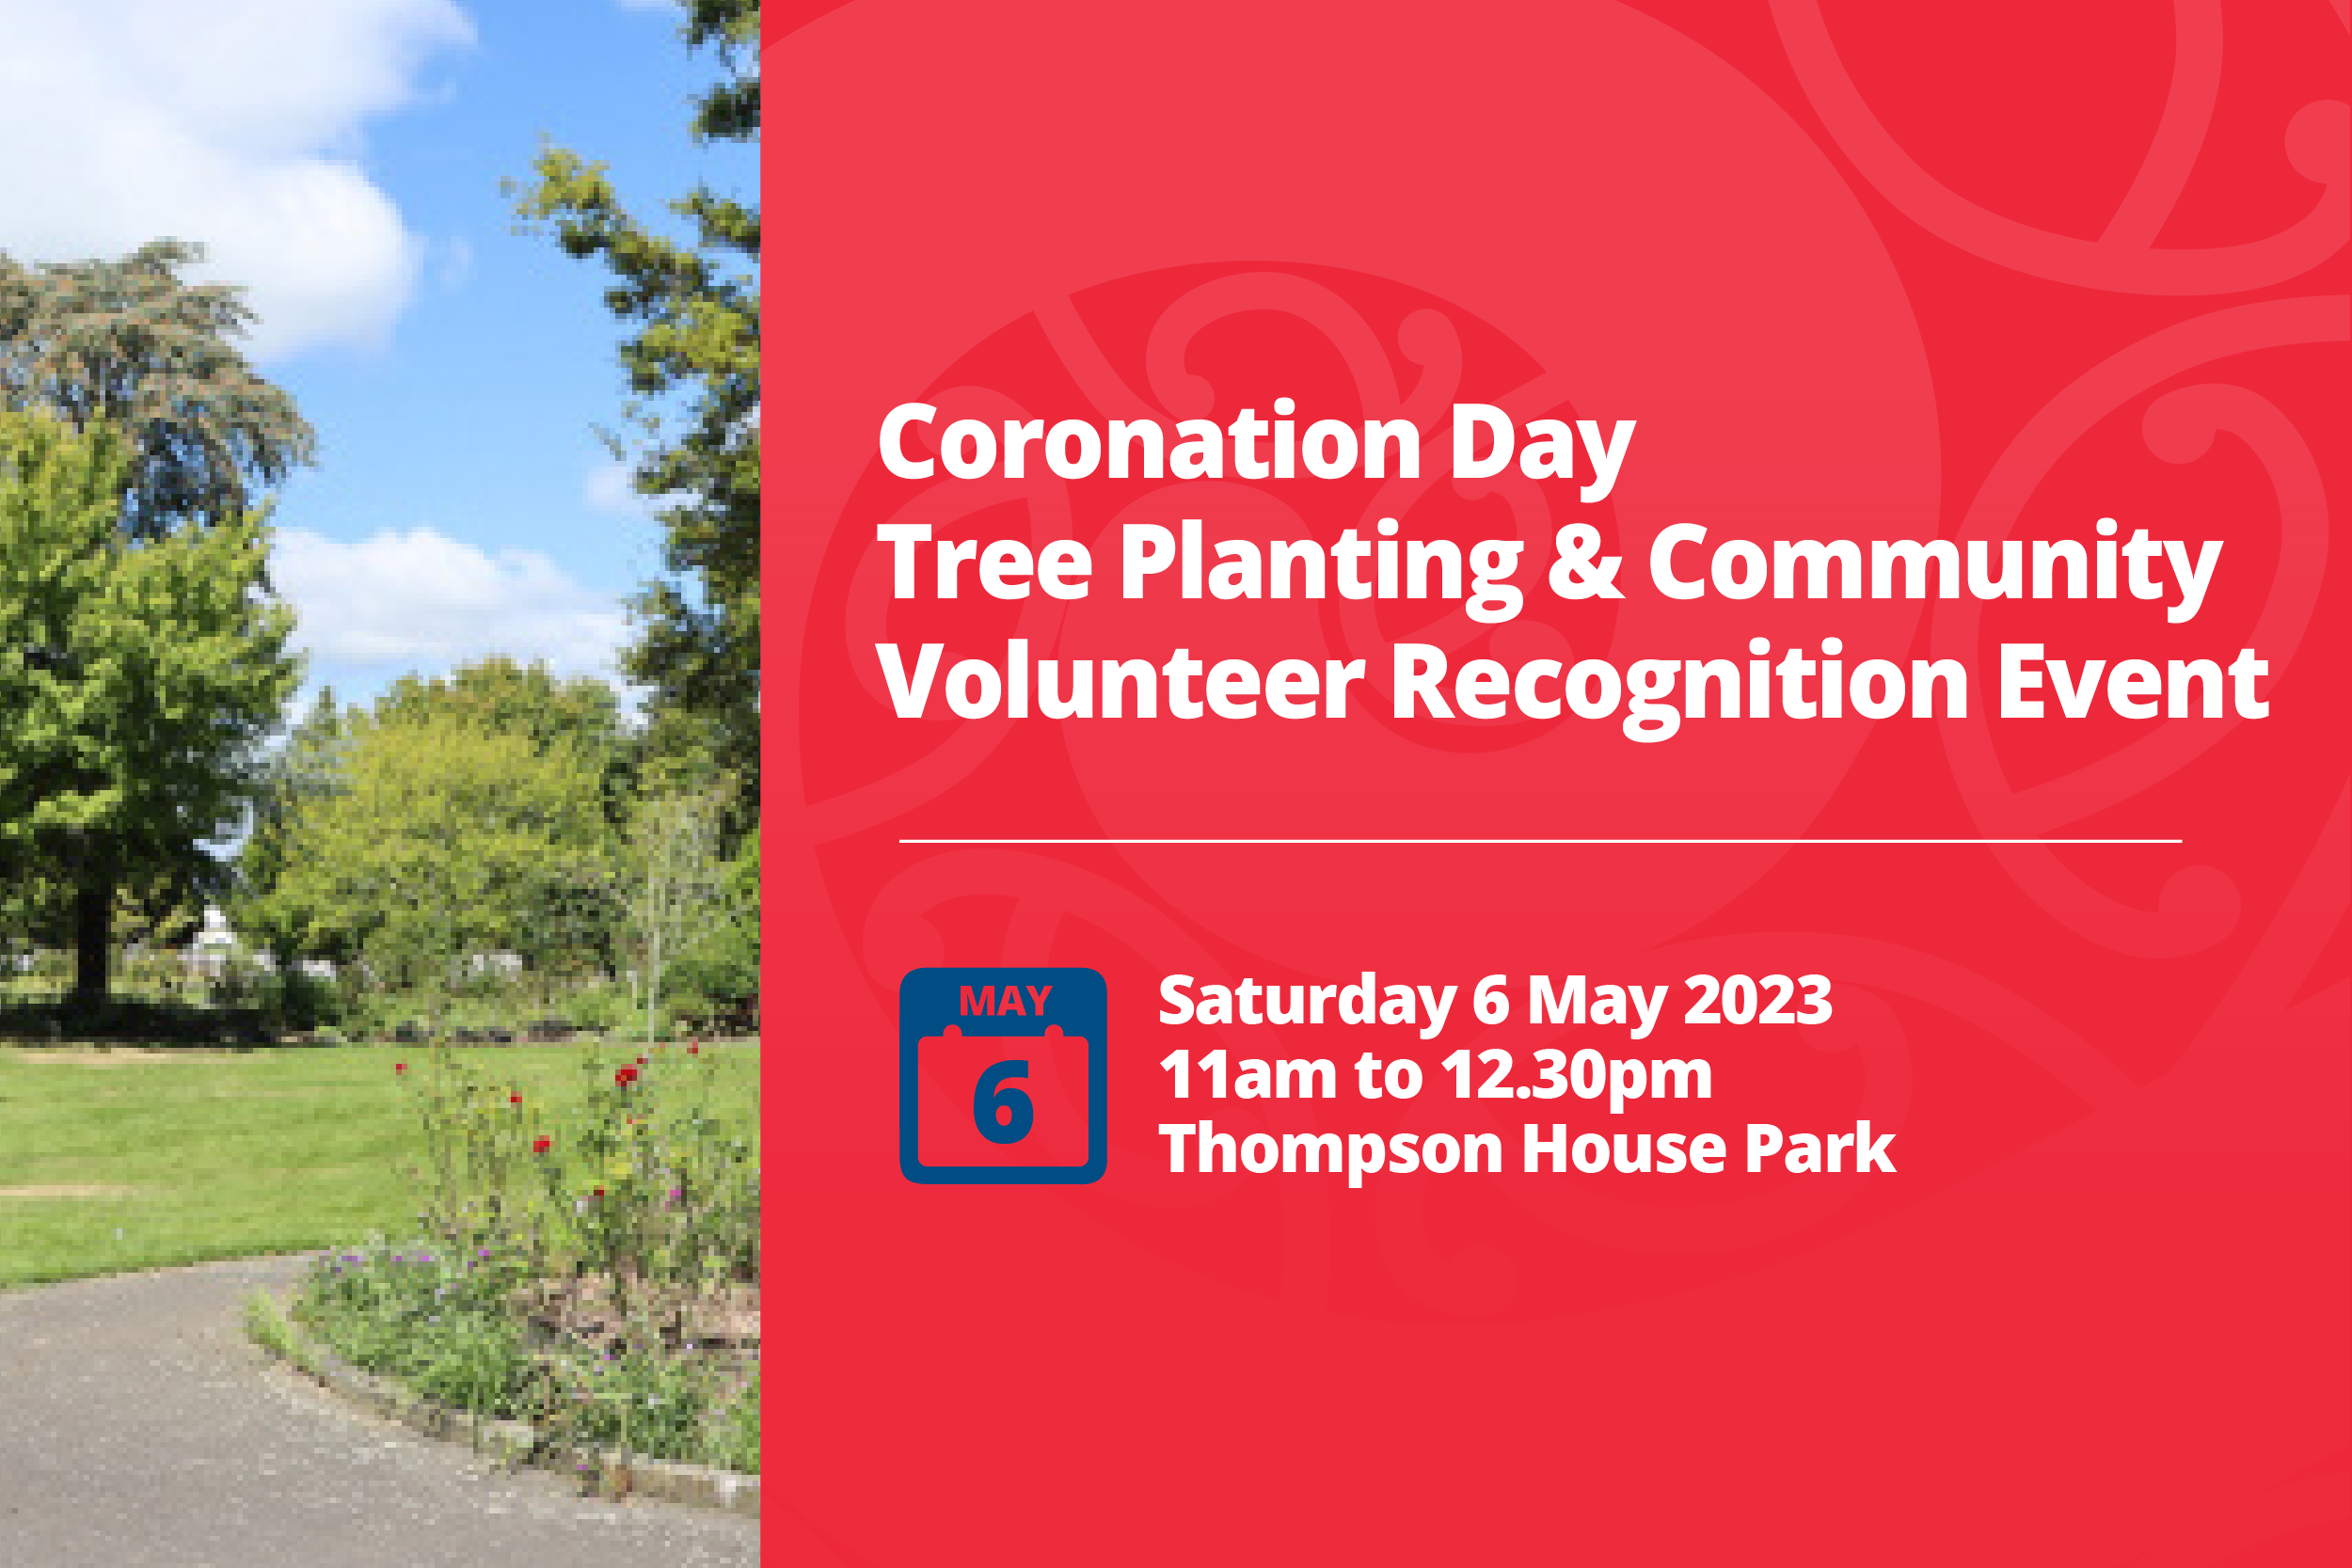 Coronation Day Tree Planting and Community Volunteer Recognition Event.